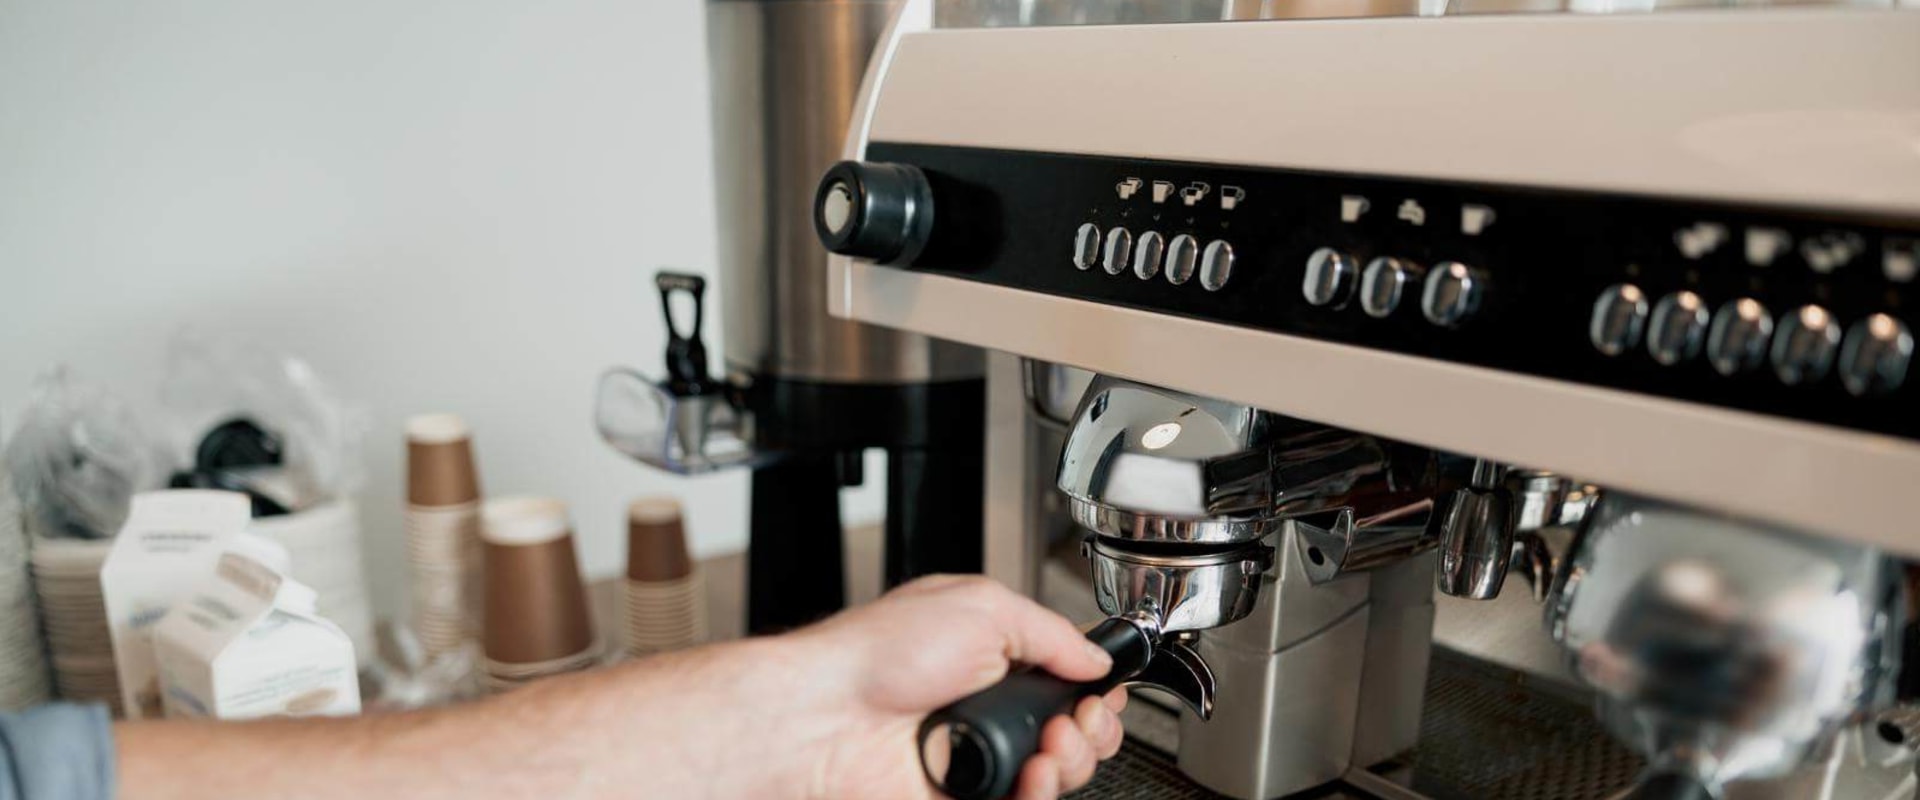 Can you put any coffee in a coffee machine?